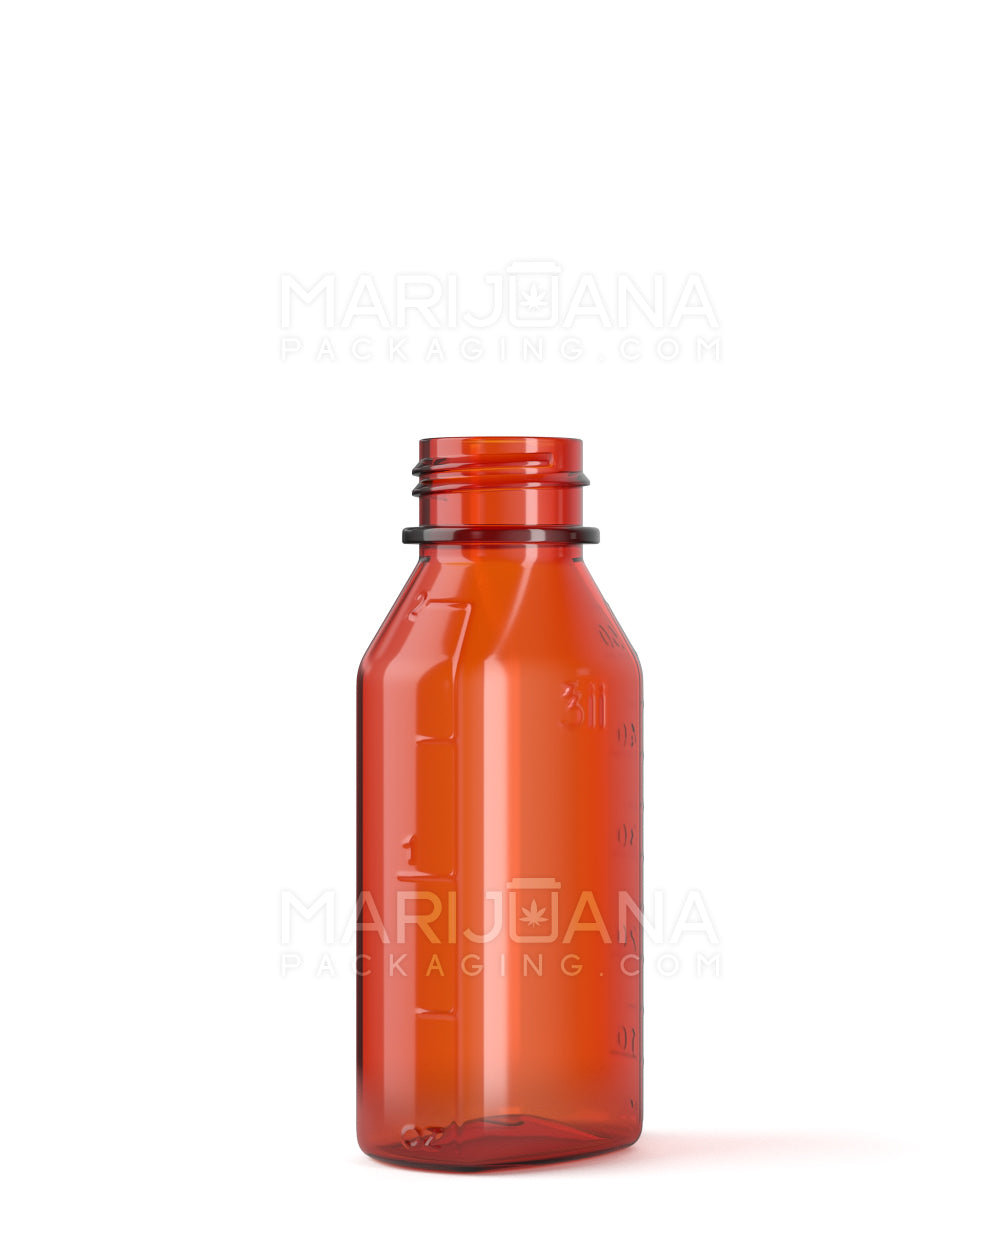 Child Resistant | Push Down & Turn Plastic Syrup Bottles | 2oz - Amber - 200 Count - 3